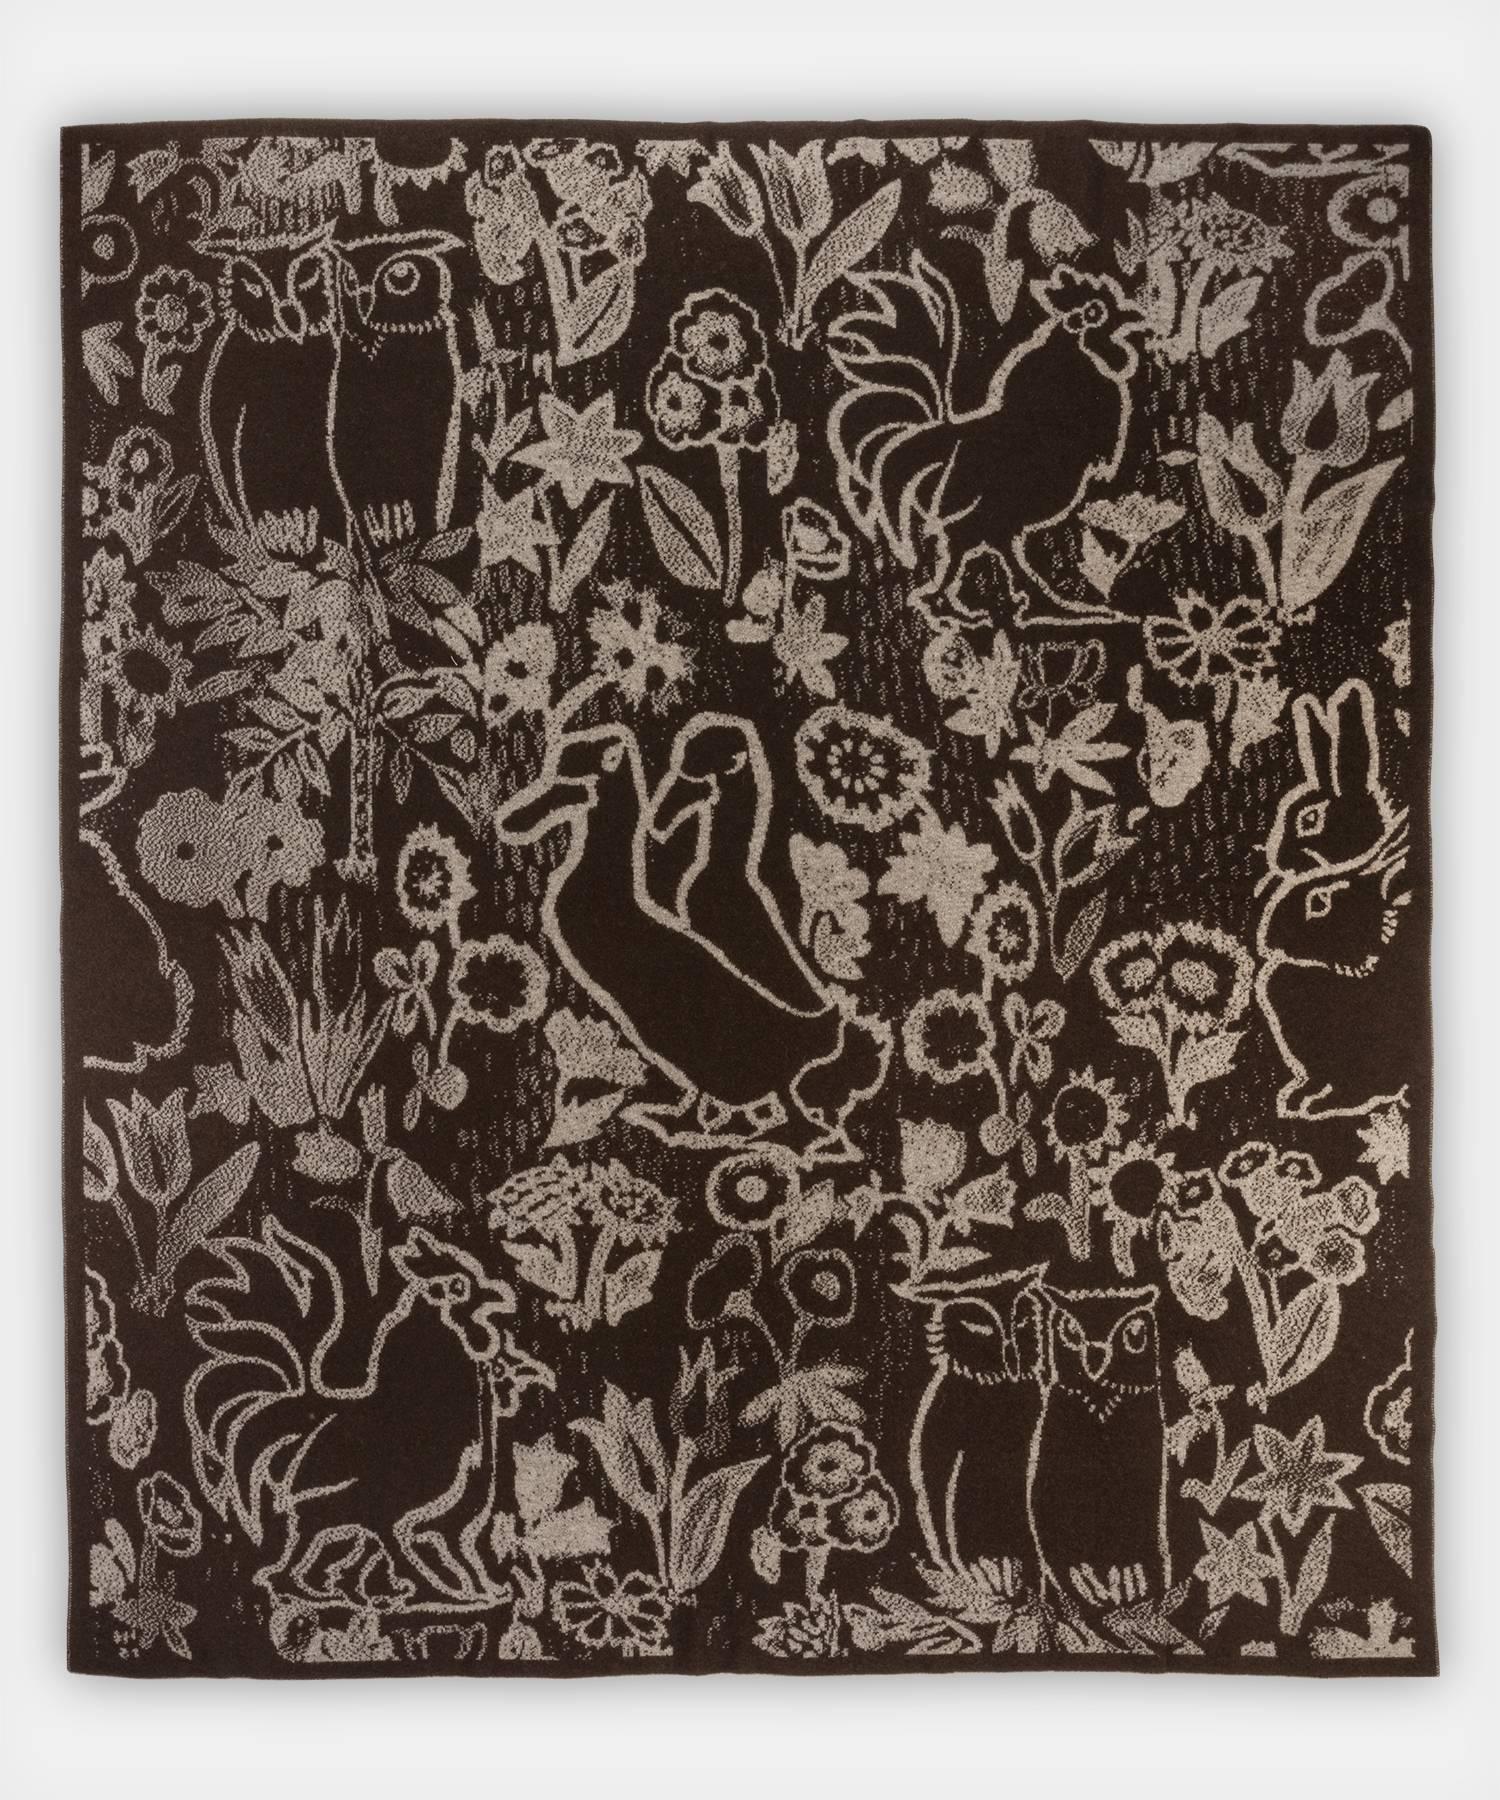 Friends blanket by Saved, New York

Featuring a folksy and tonal chorus of animals, this Art Nouveau inspired design is finished by hand in a warm, soft jacquard knit. Available in King and Queen sizes, please inquire for pricing, availability, and